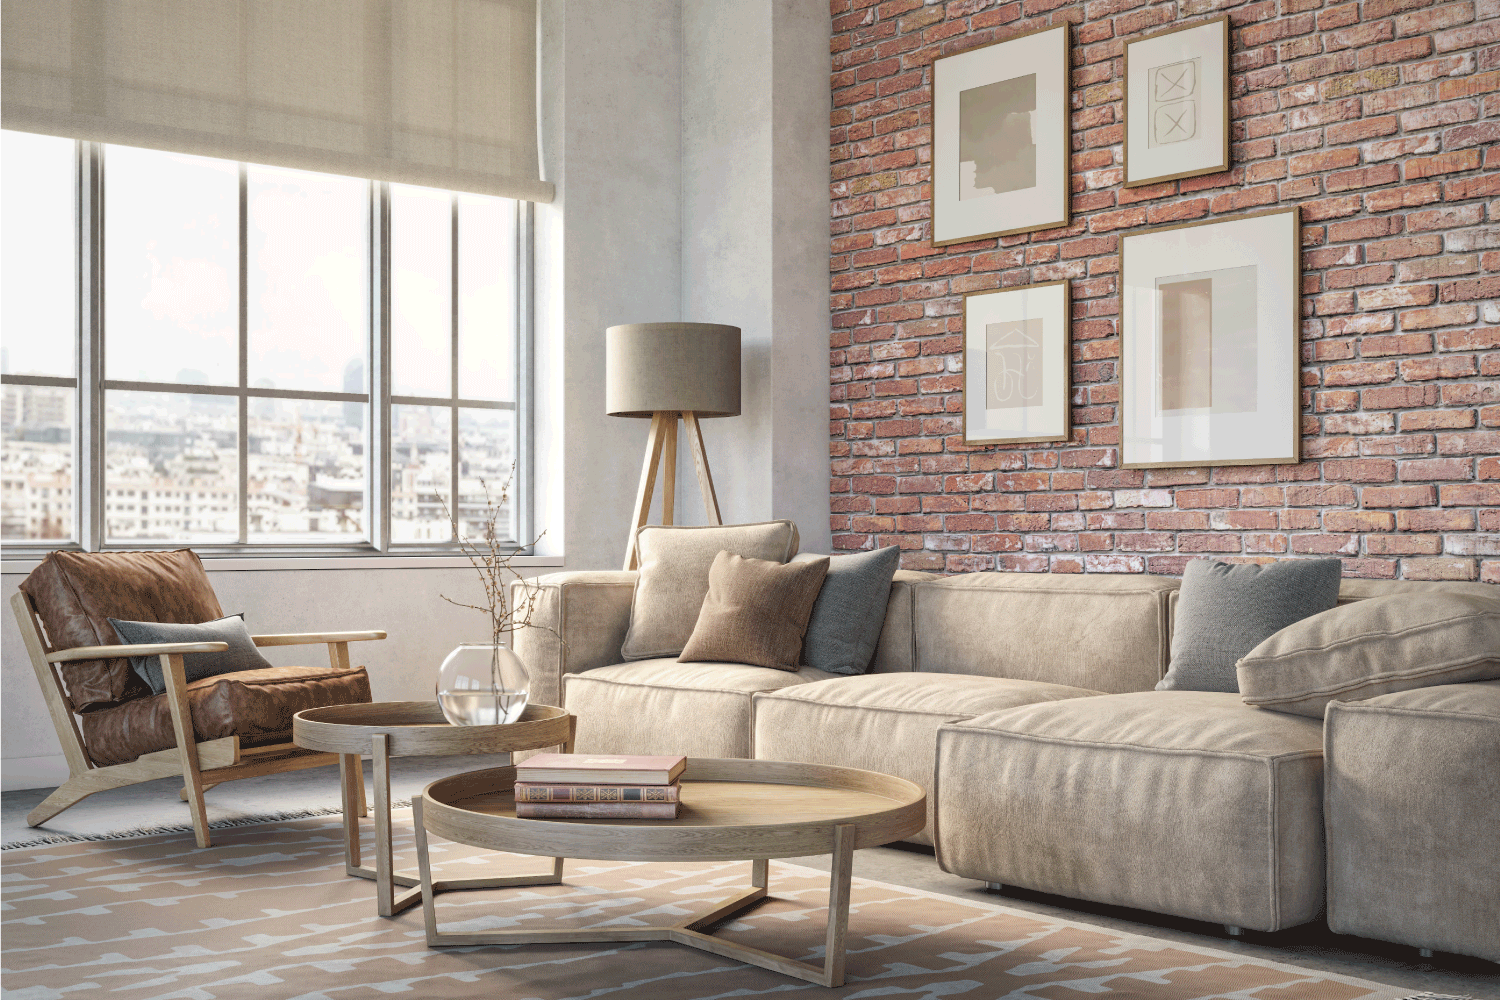 Bohemian living room interior with beige colored furniture and wooden elements and brick wall, rust colored bricks